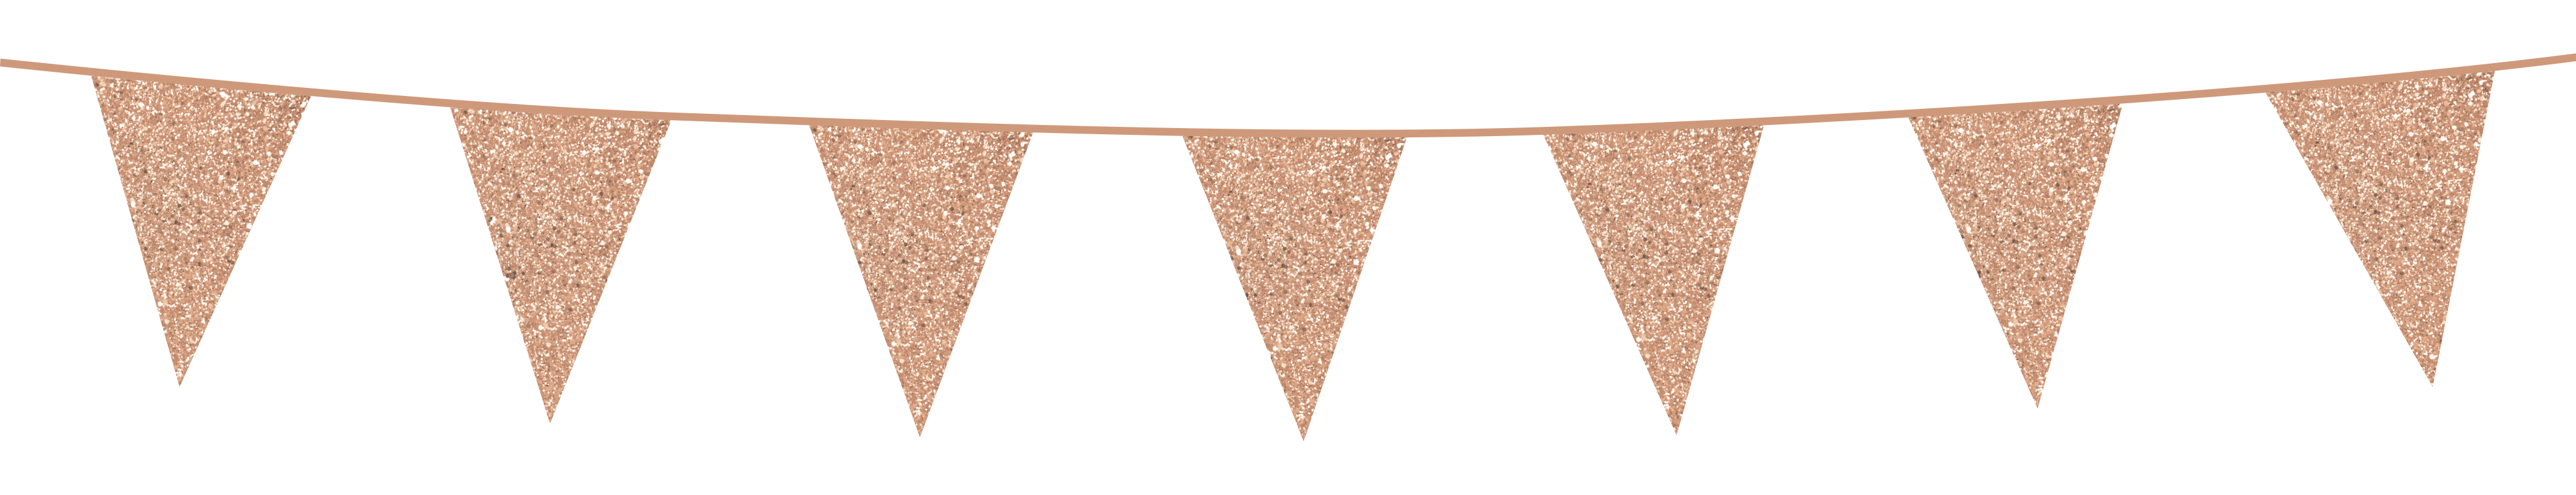 Bunting Glitter 6m. Rose Gold - size flags 20x30cm per 6